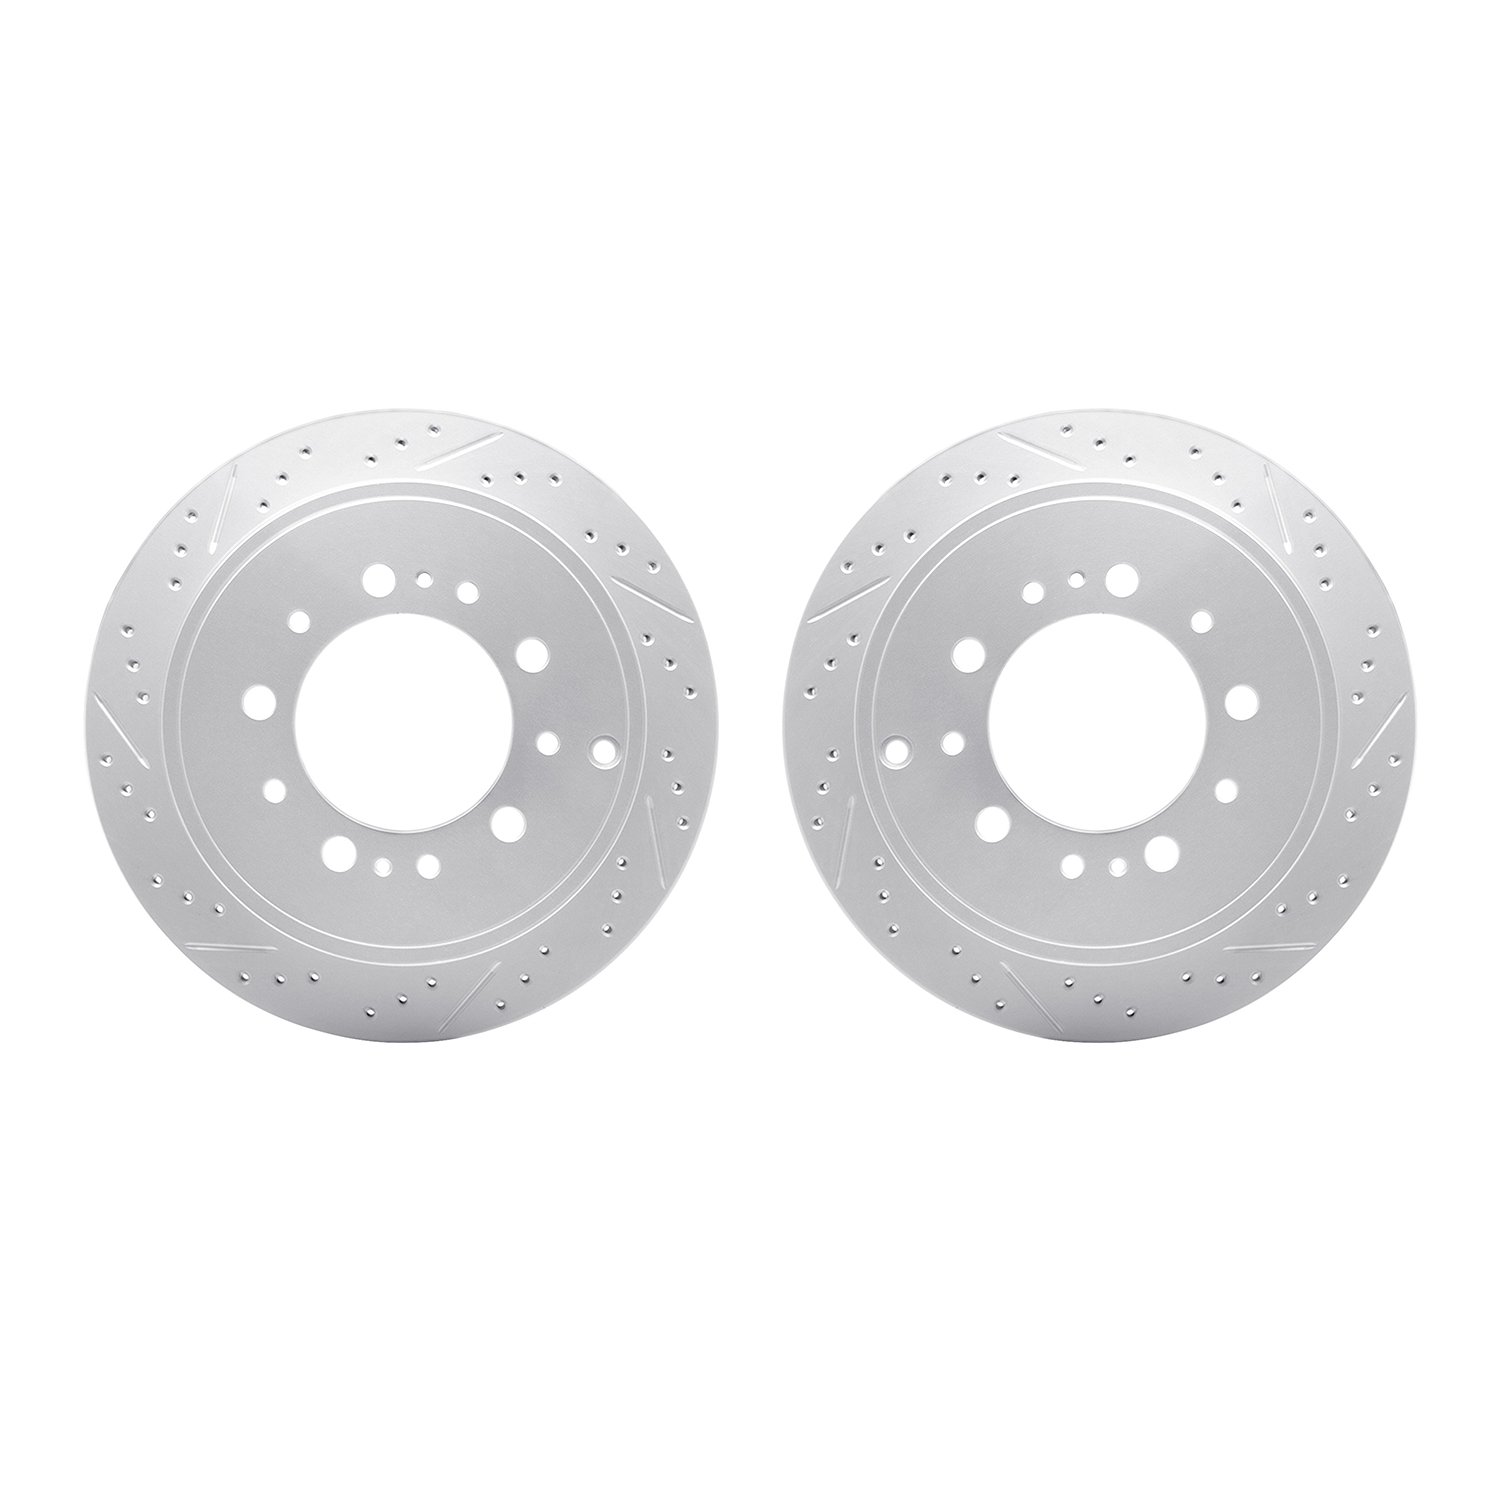 2002-76049 Geoperformance Drilled/Slotted Brake Rotors, Fits Select Lexus/Toyota/Scion, Position: Rear